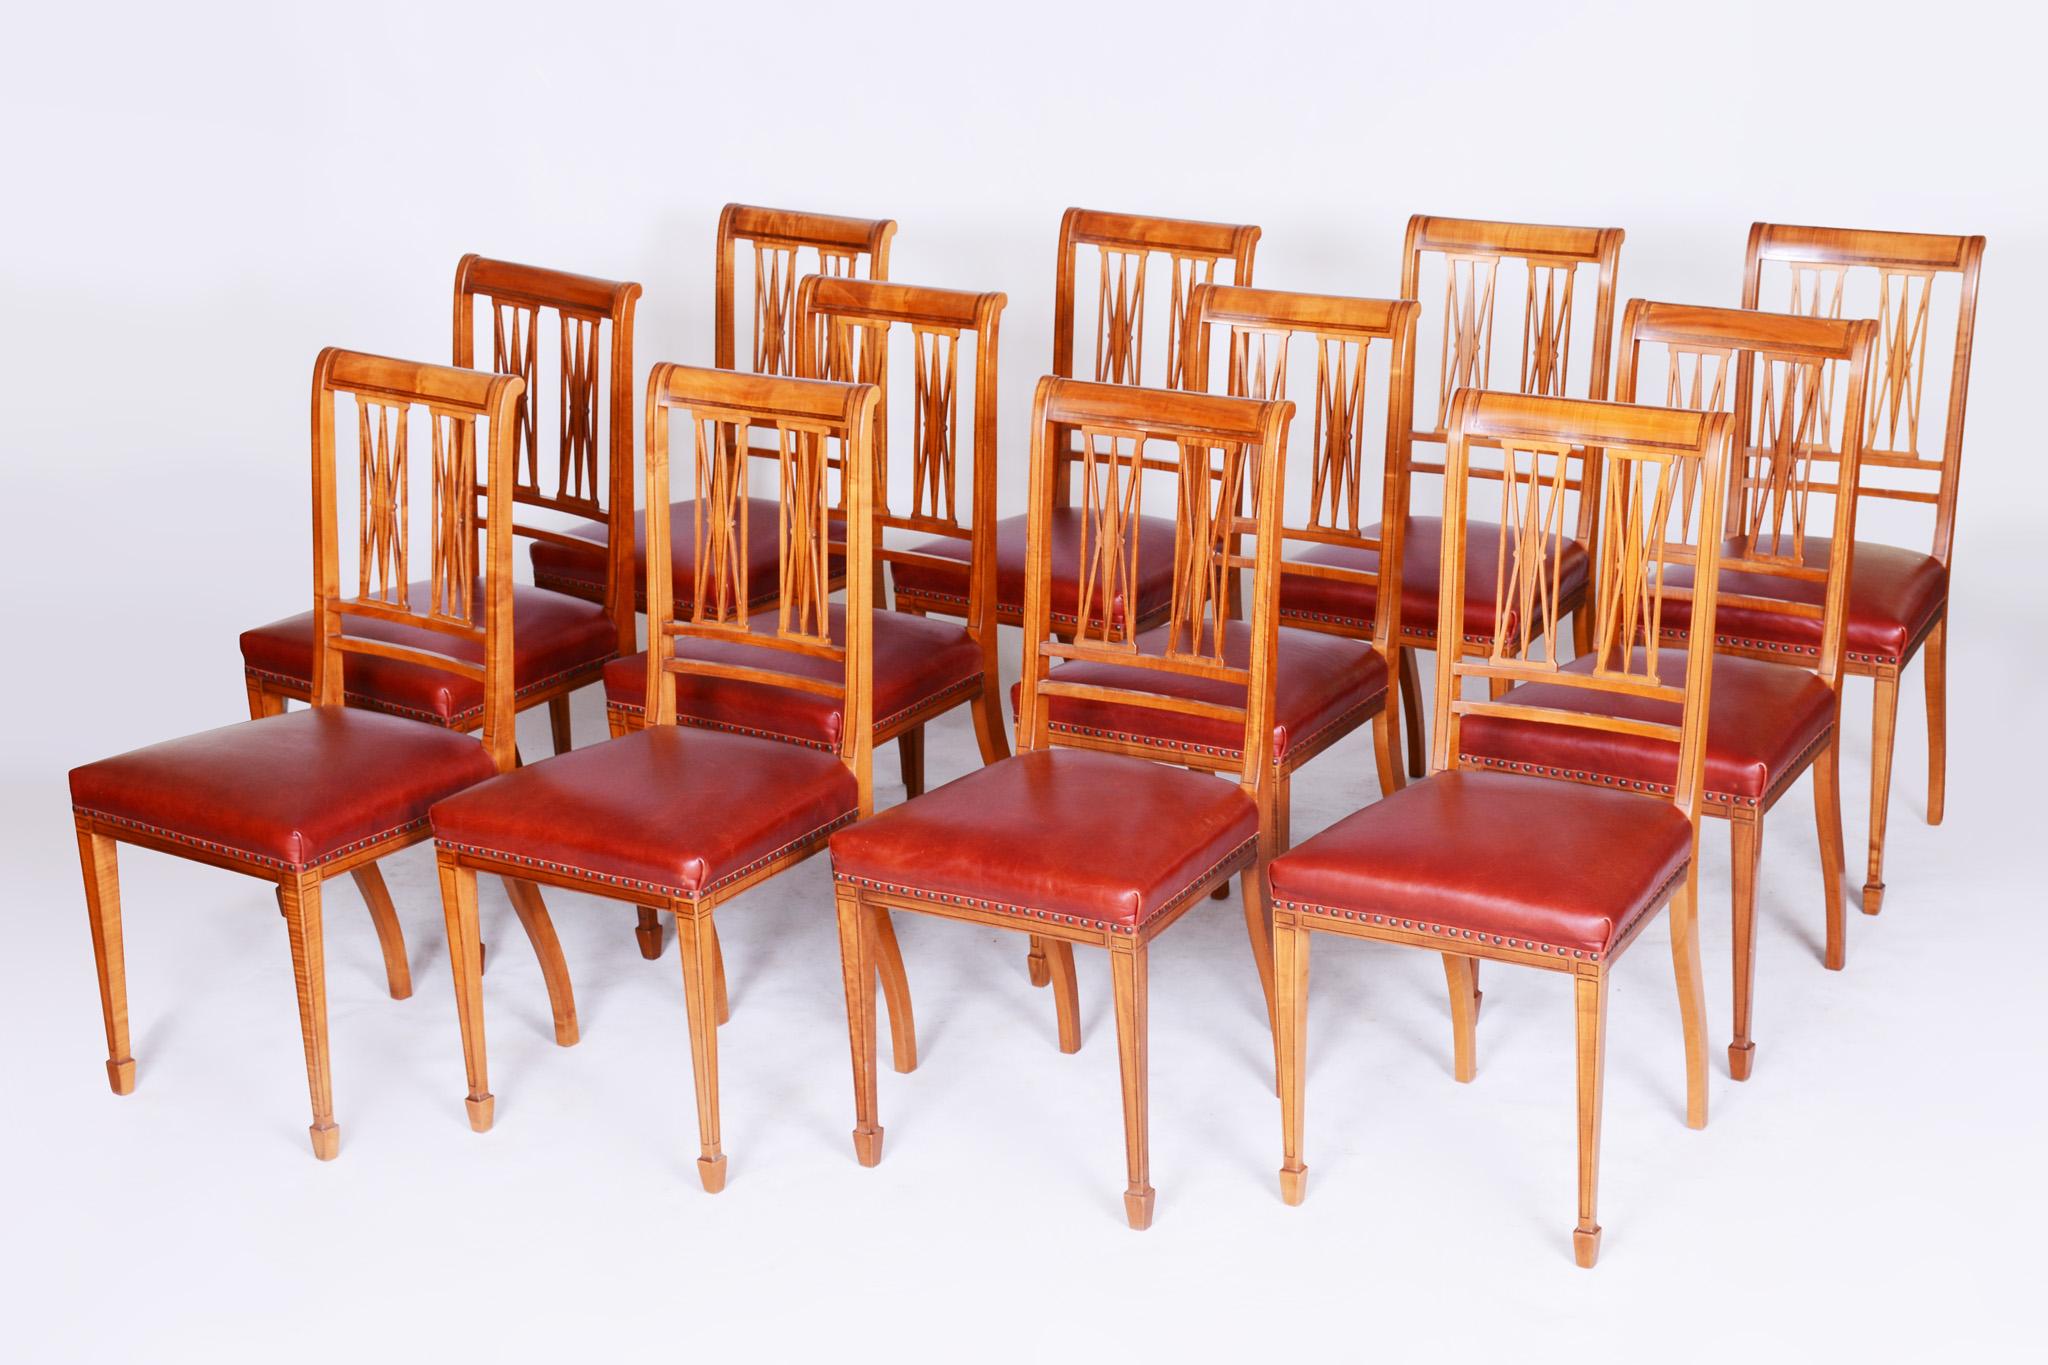 19th Century Original British Dinning Room Set with 12 Chairs, Satin Wood For Sale 12